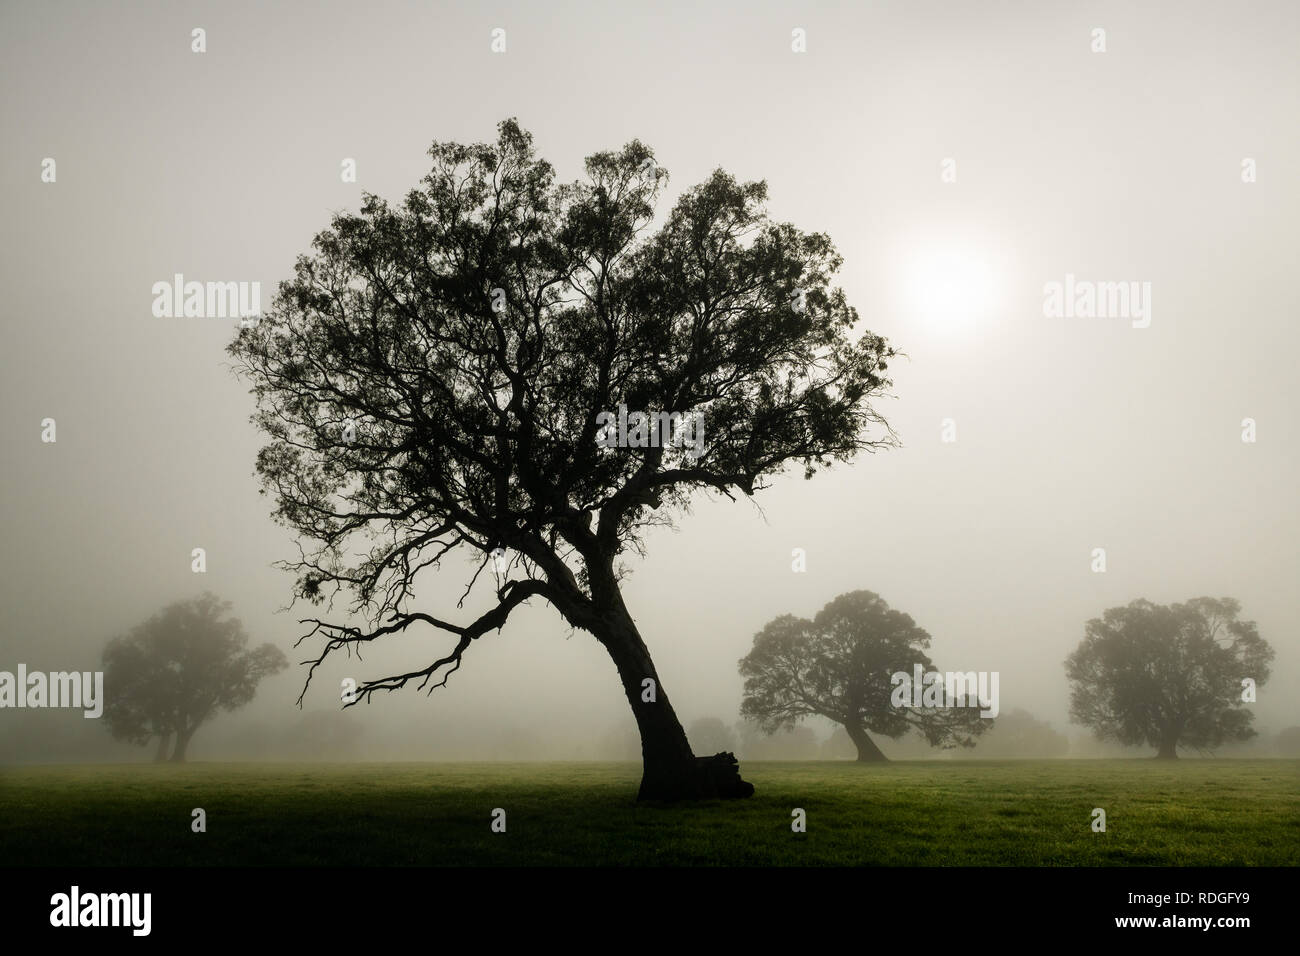 A misty morning in the Wimmera. Stock Photo